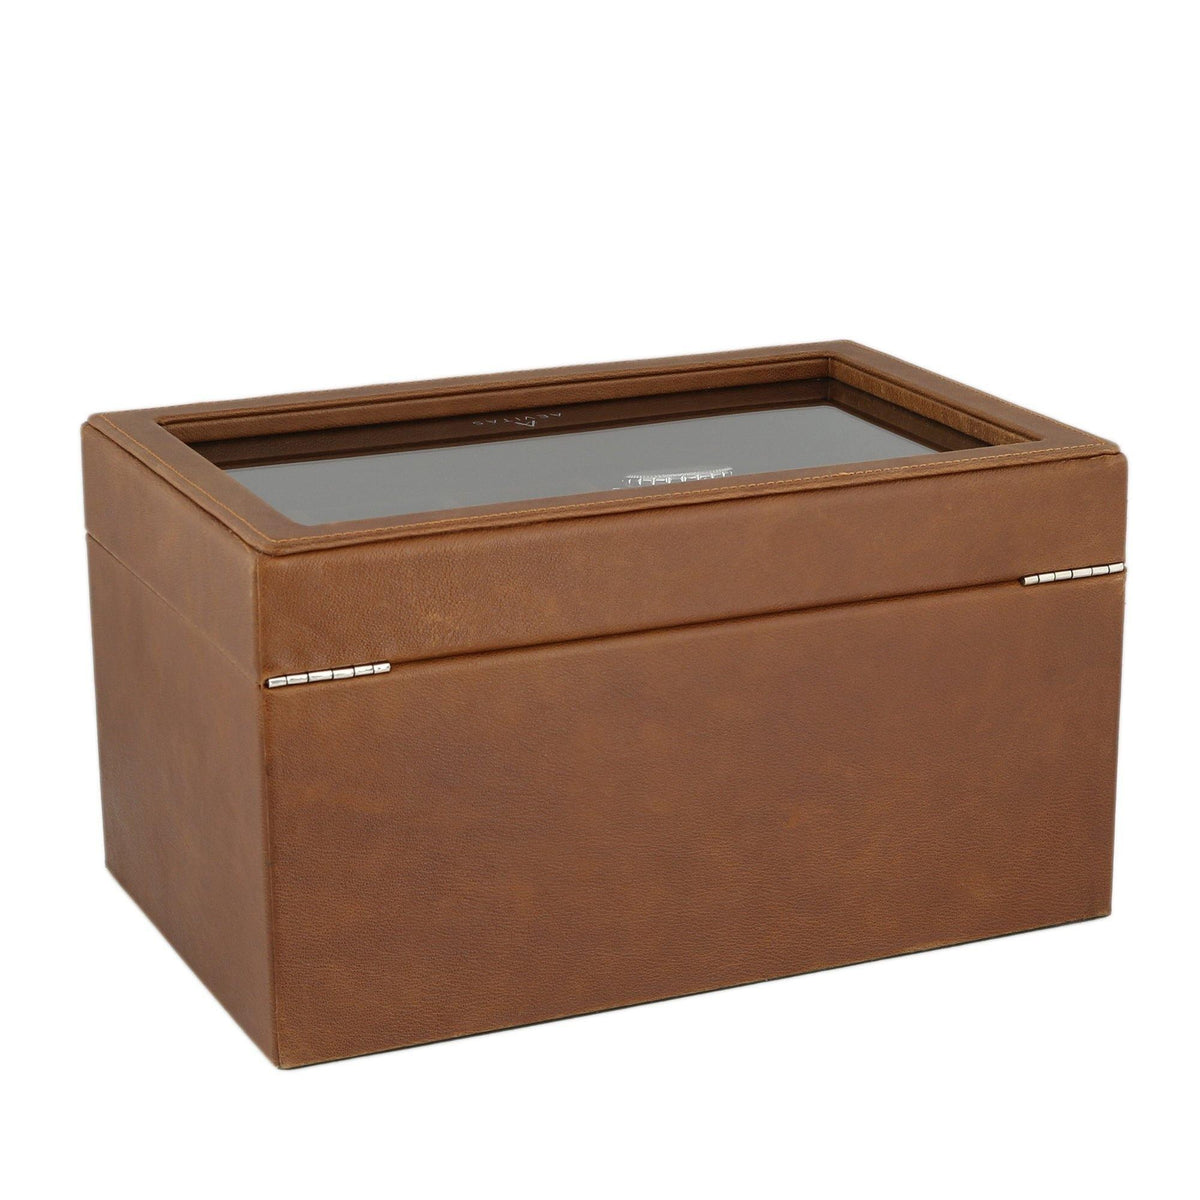 Cognac Brown Genuine Leather Watch Collectors Box with Drawer for 20 Wrist watches by Aevitas